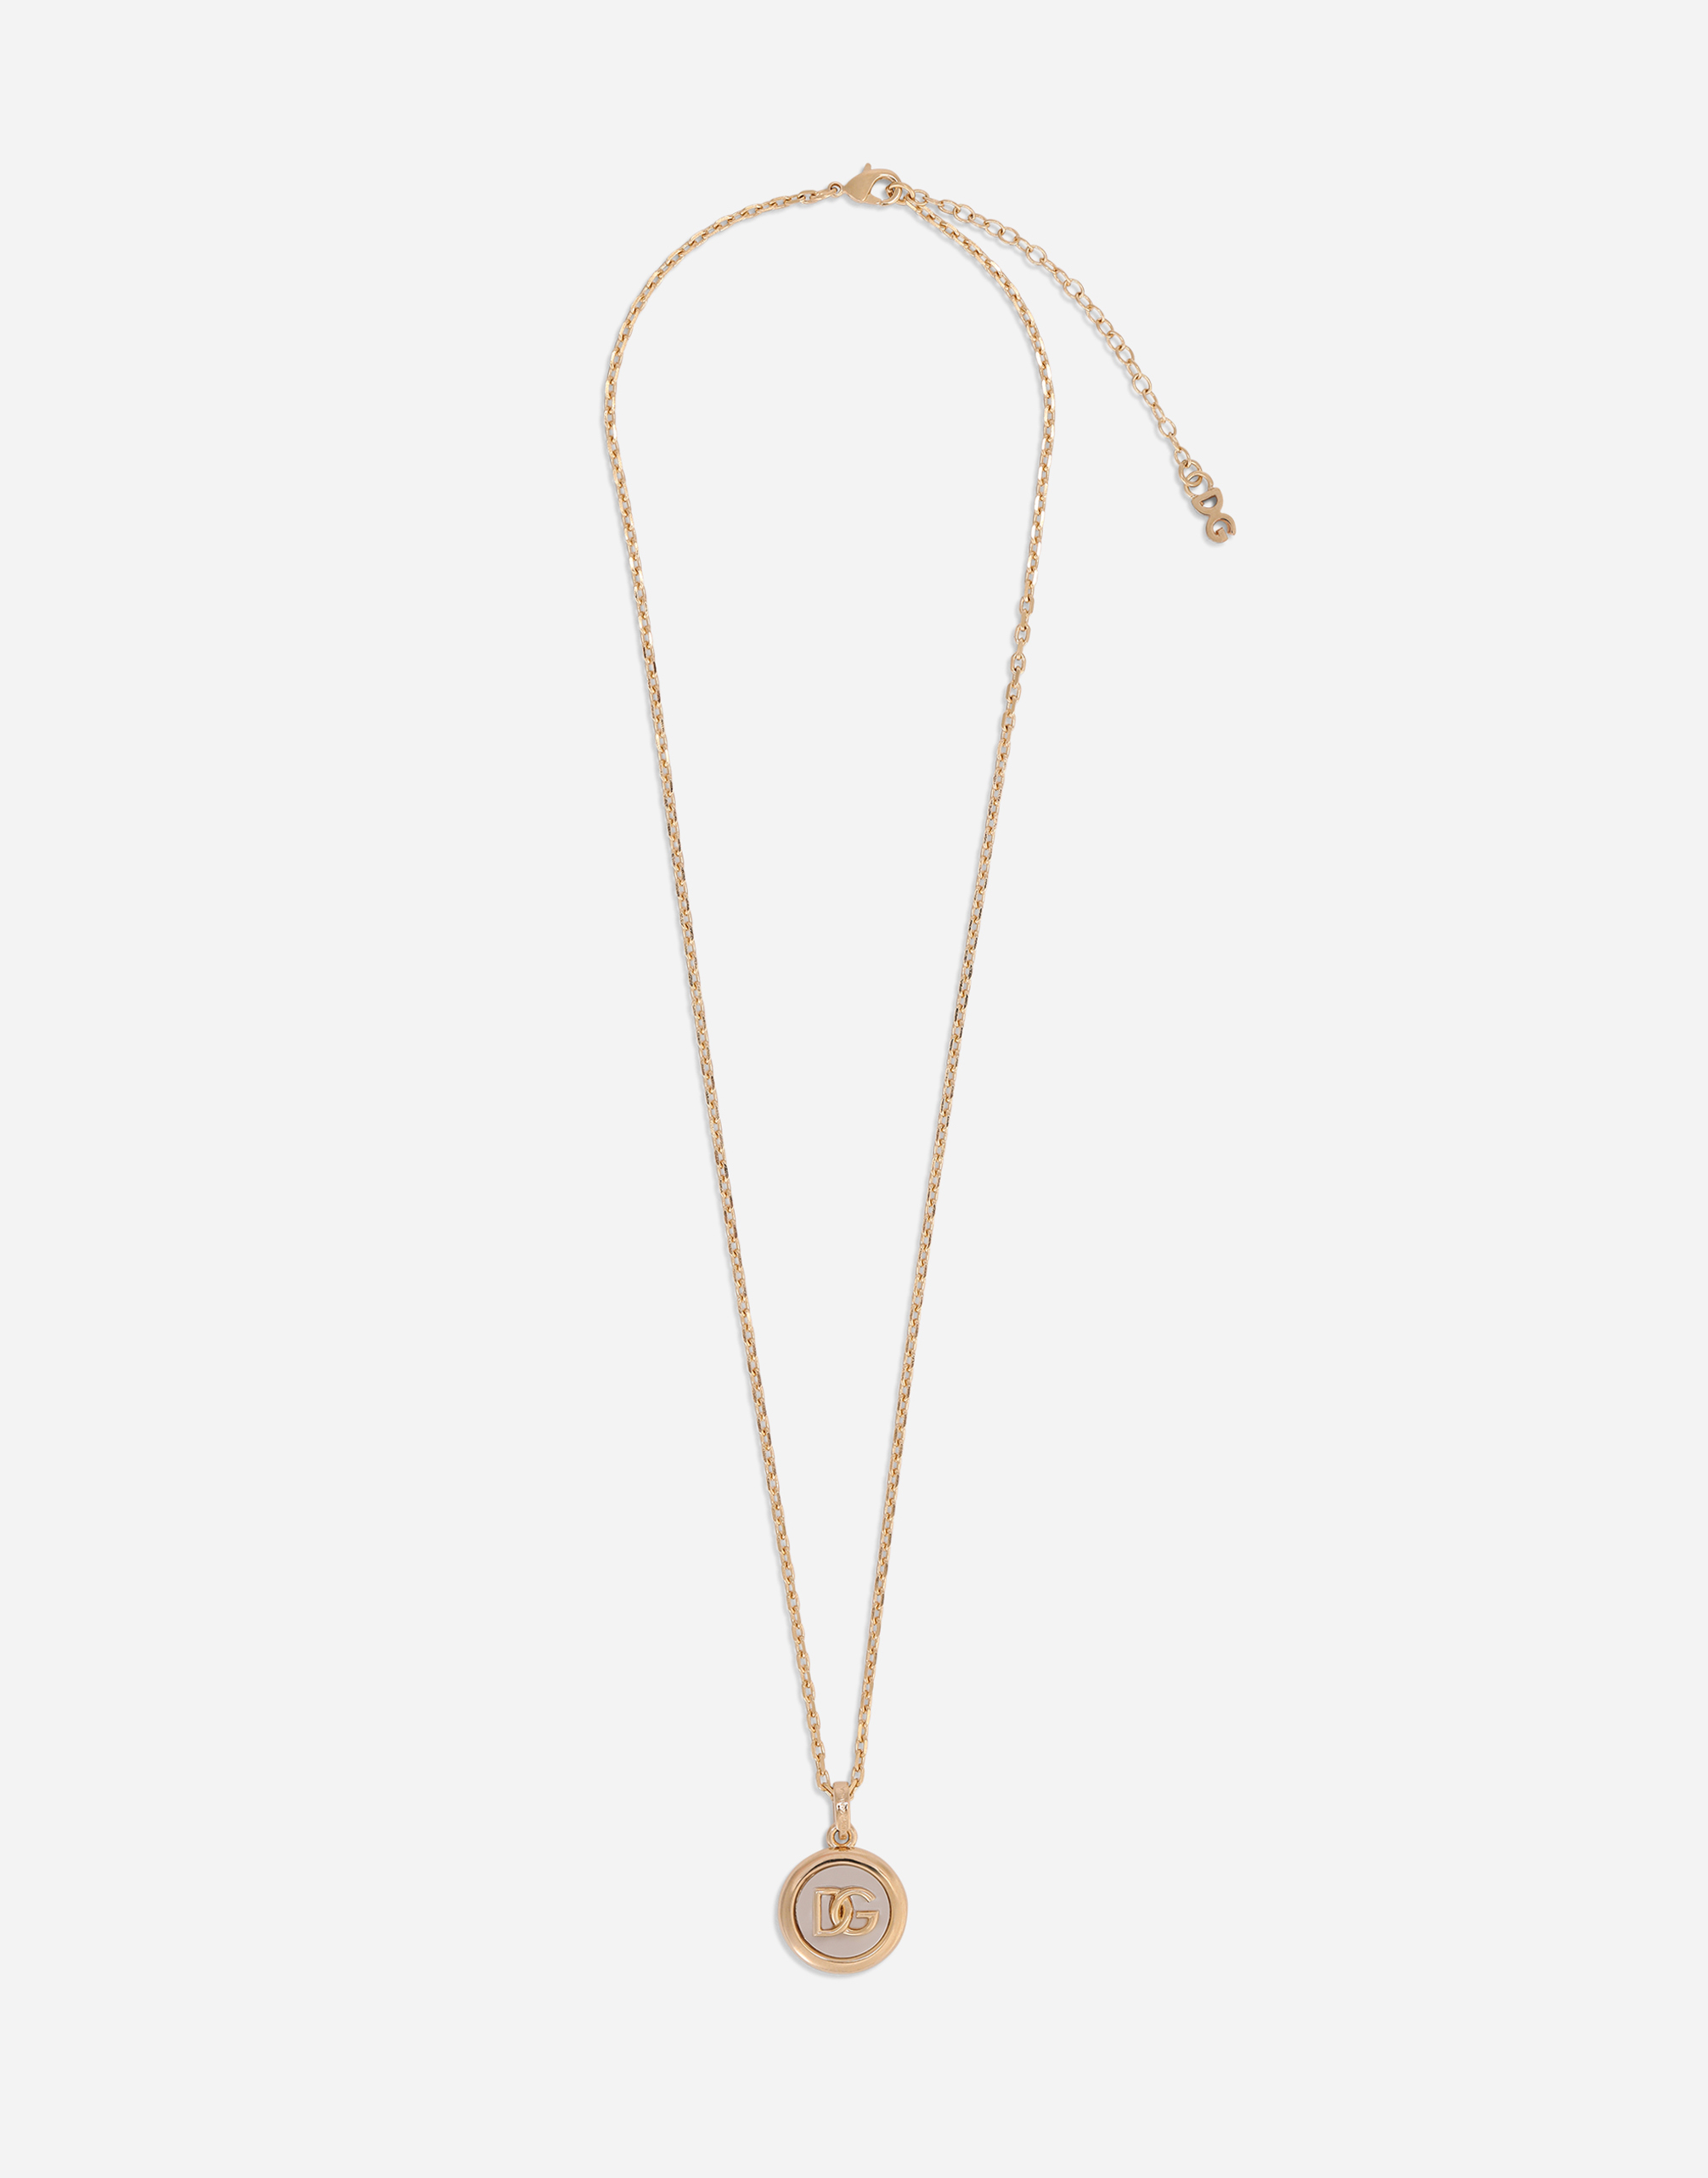 Necklace with mother-of-pearl DG logo pendant in Gold